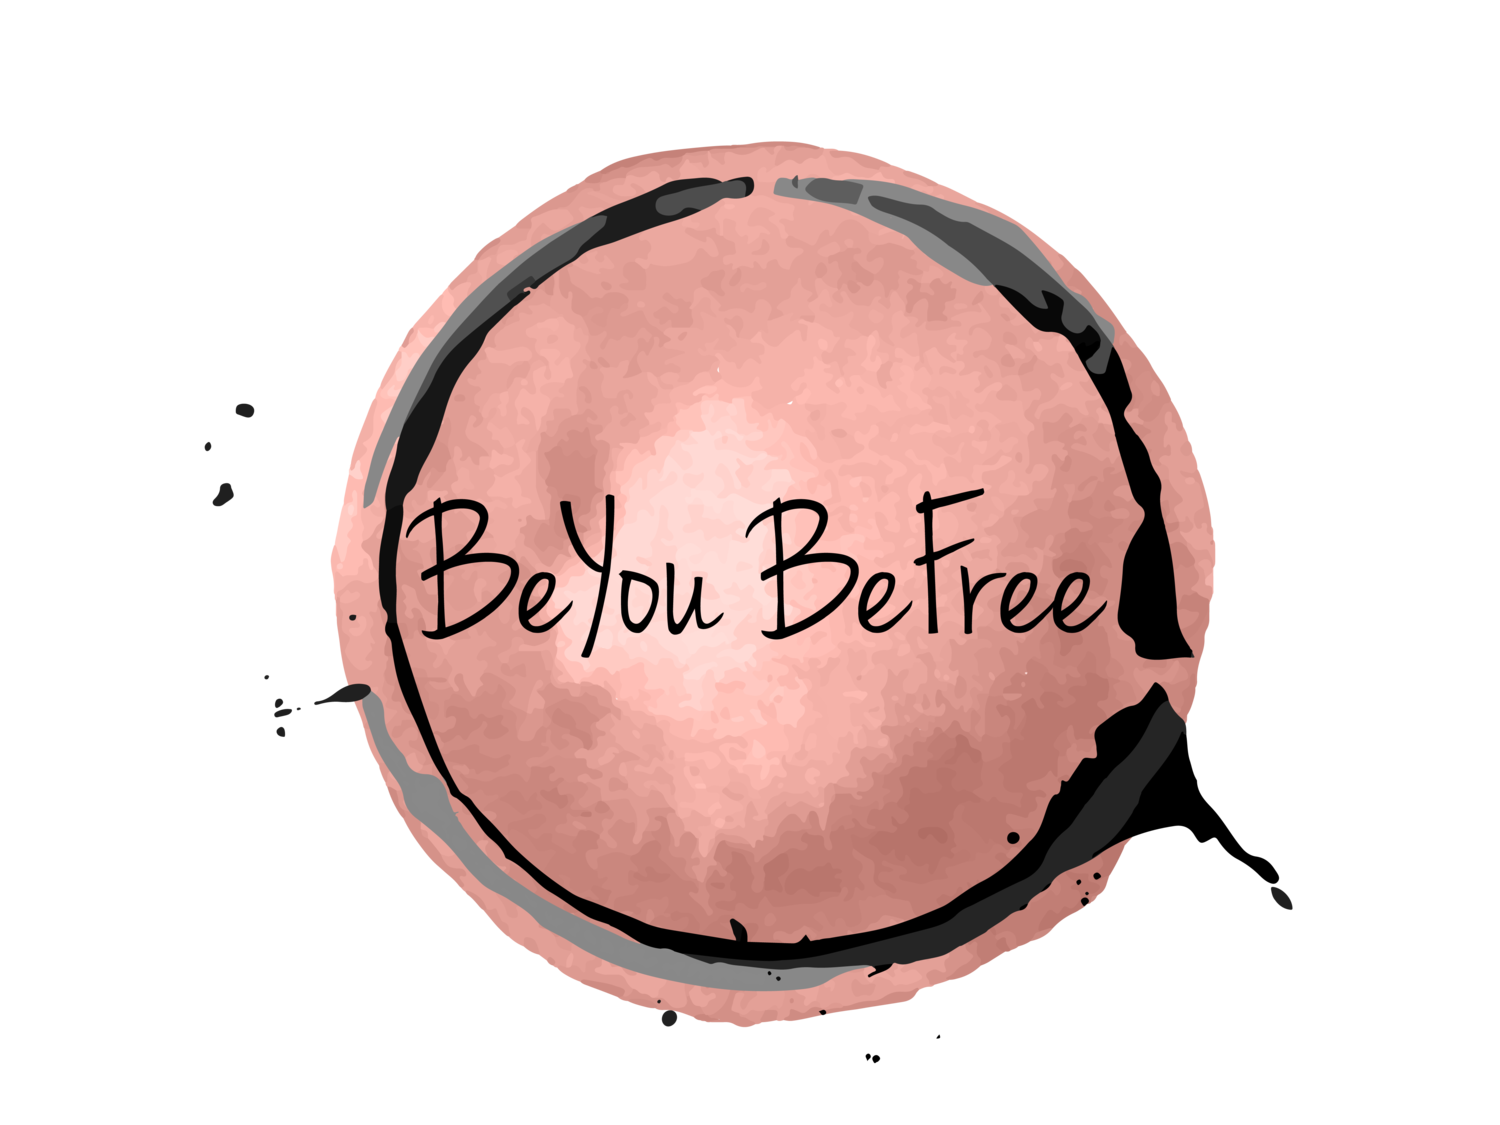 Be You Be Free - Body Positive Health & Wellbeing Community